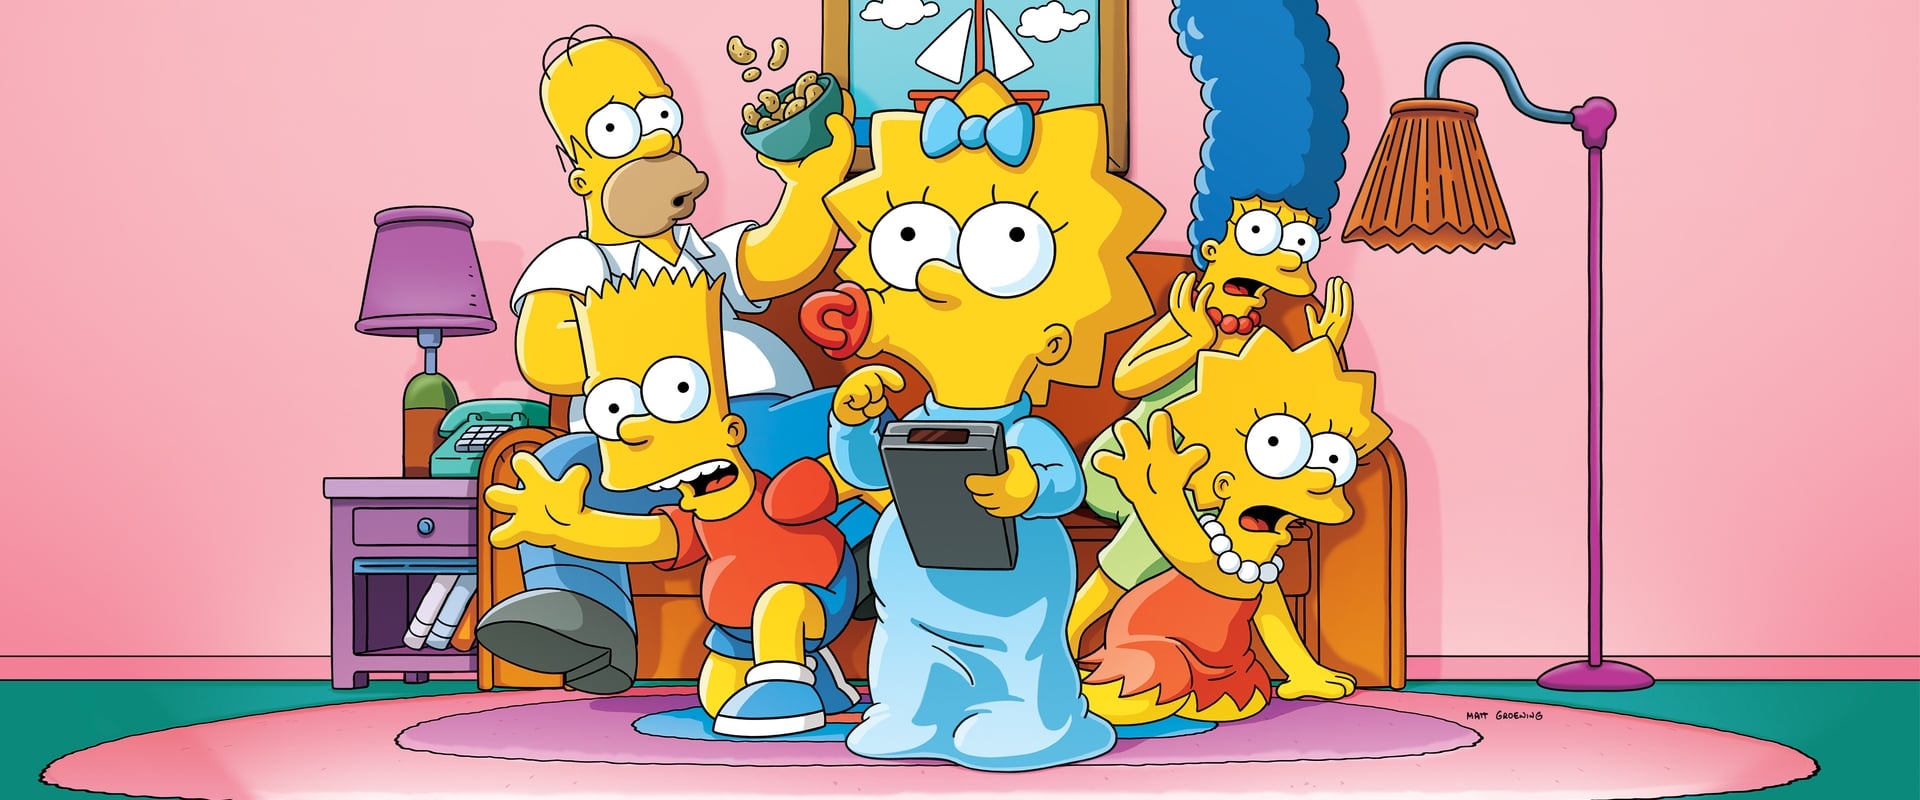 Os Simpsons